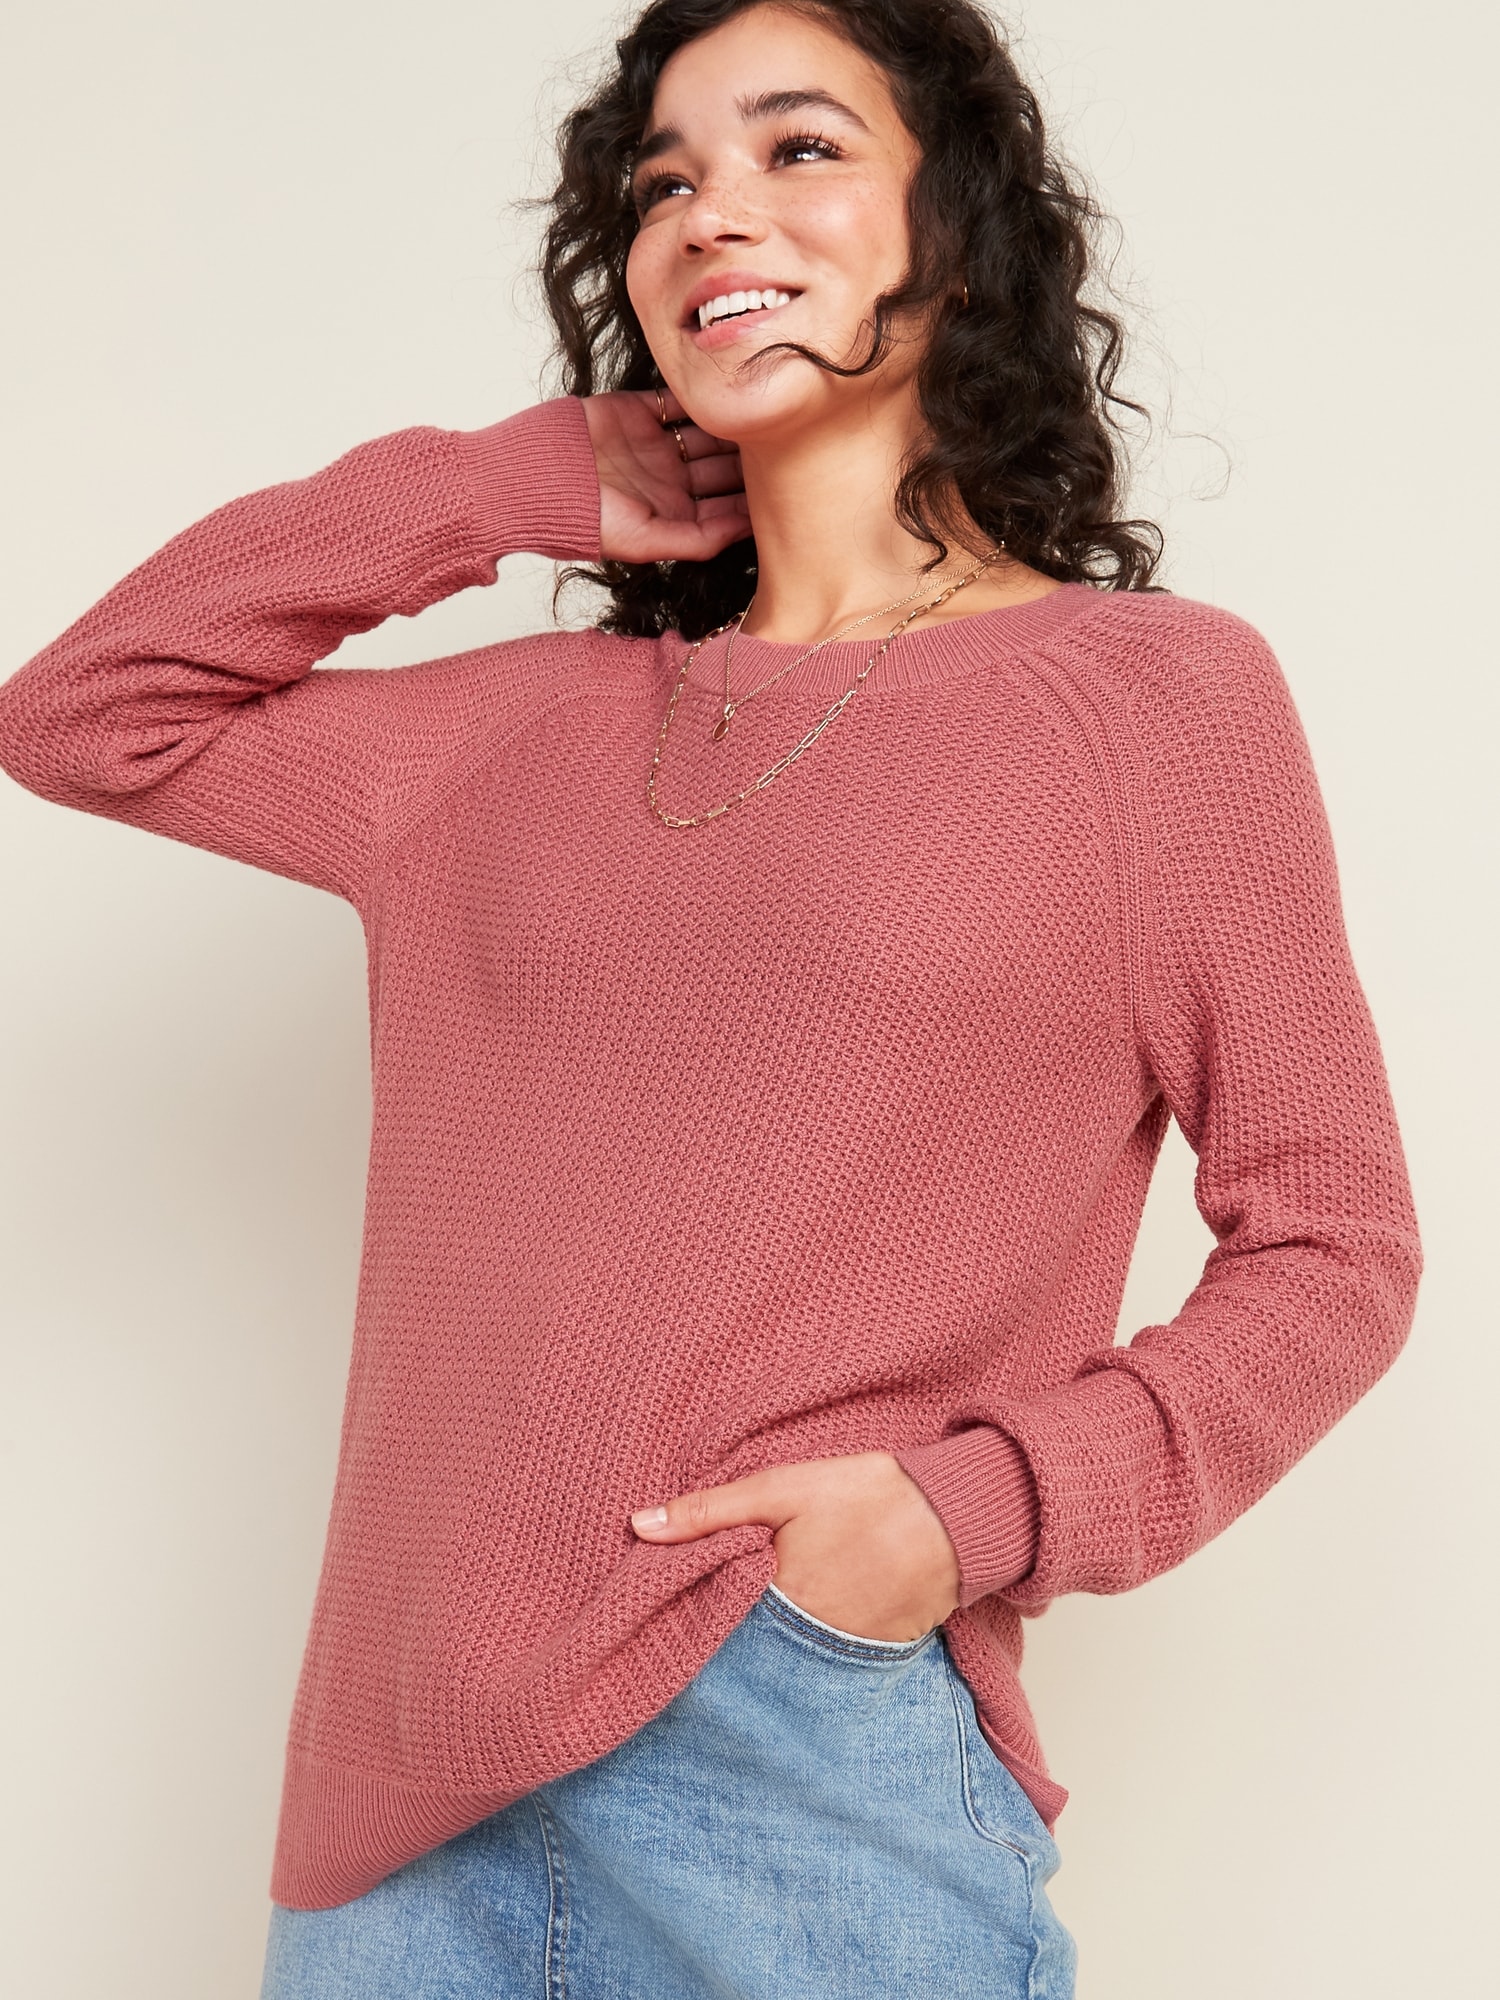 Buy old navy red sweater OFF-65